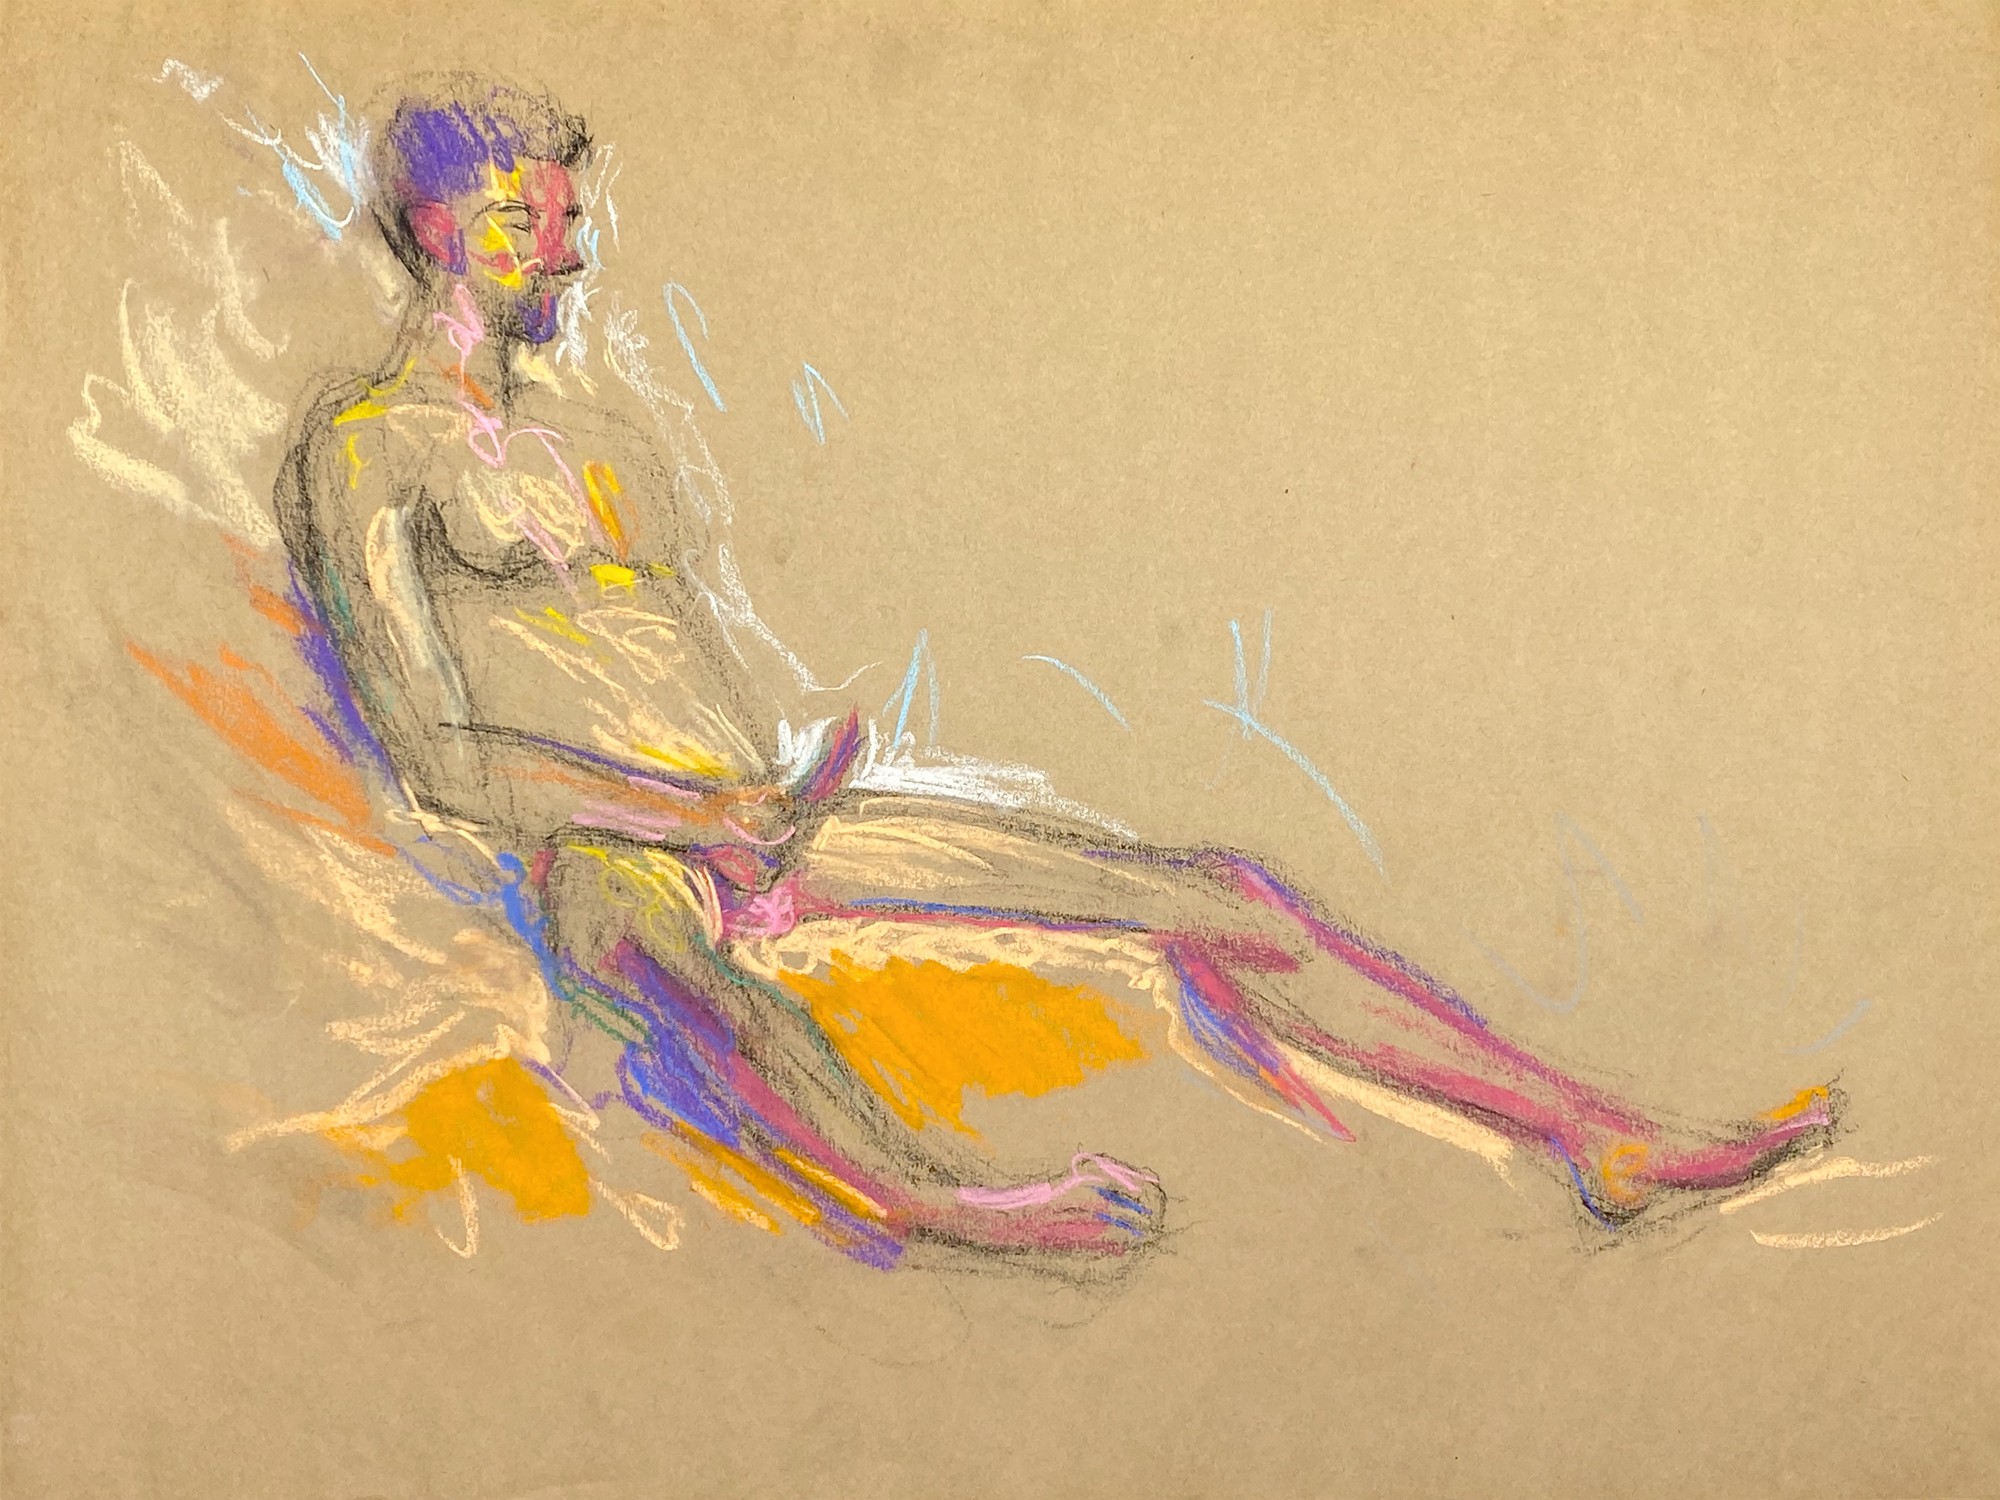 pastel drawing of male model playing